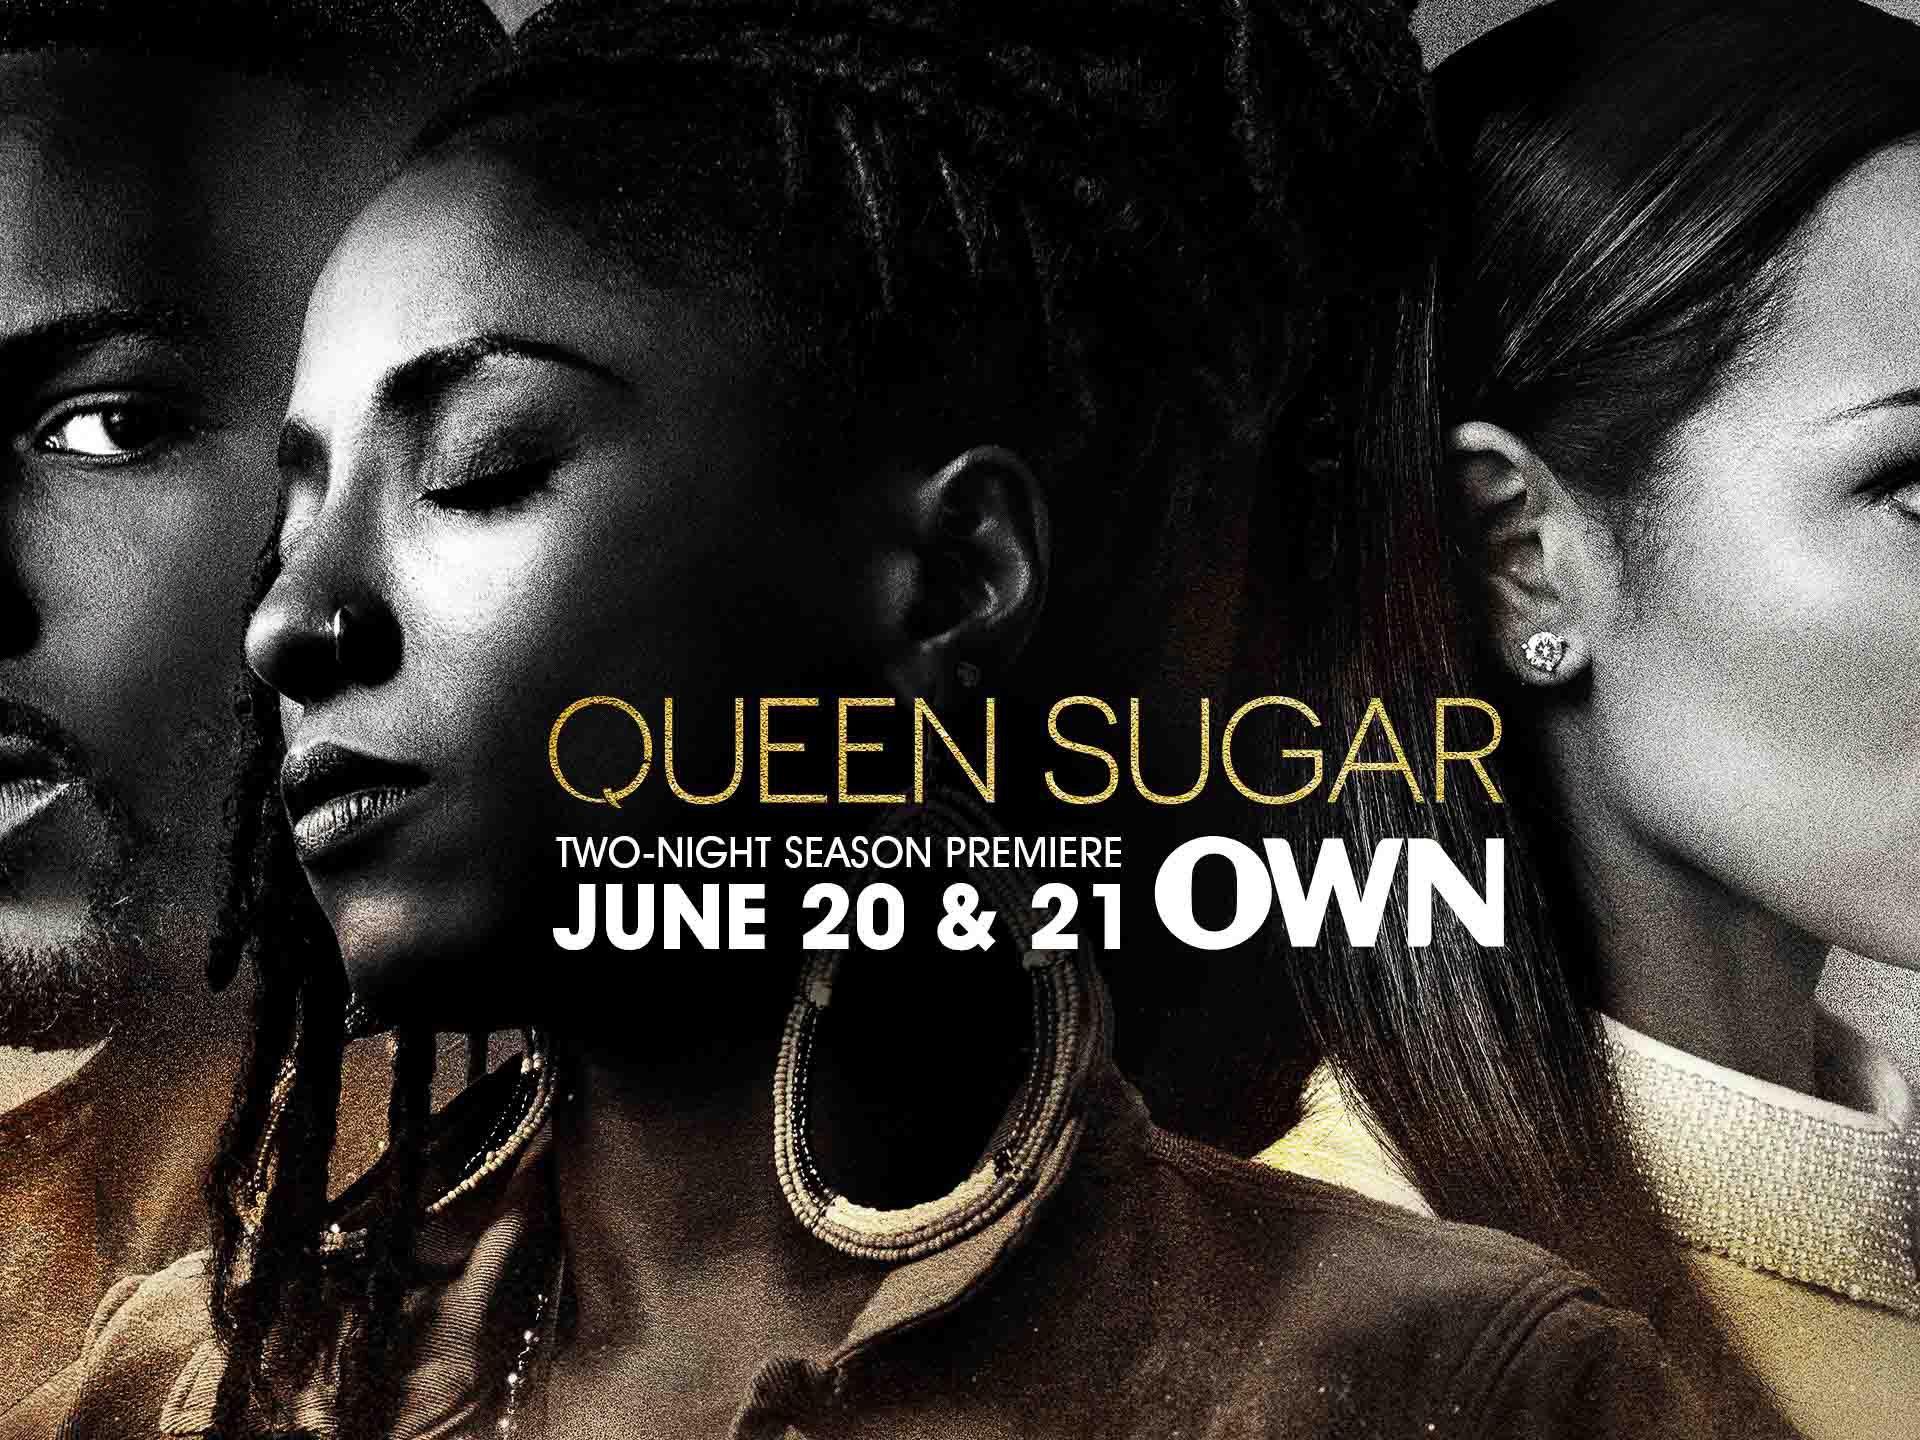 Queen Sugar is an American drama television series created and executive produced by Ava DuVernay, with Oprah Winfrey serving as a...